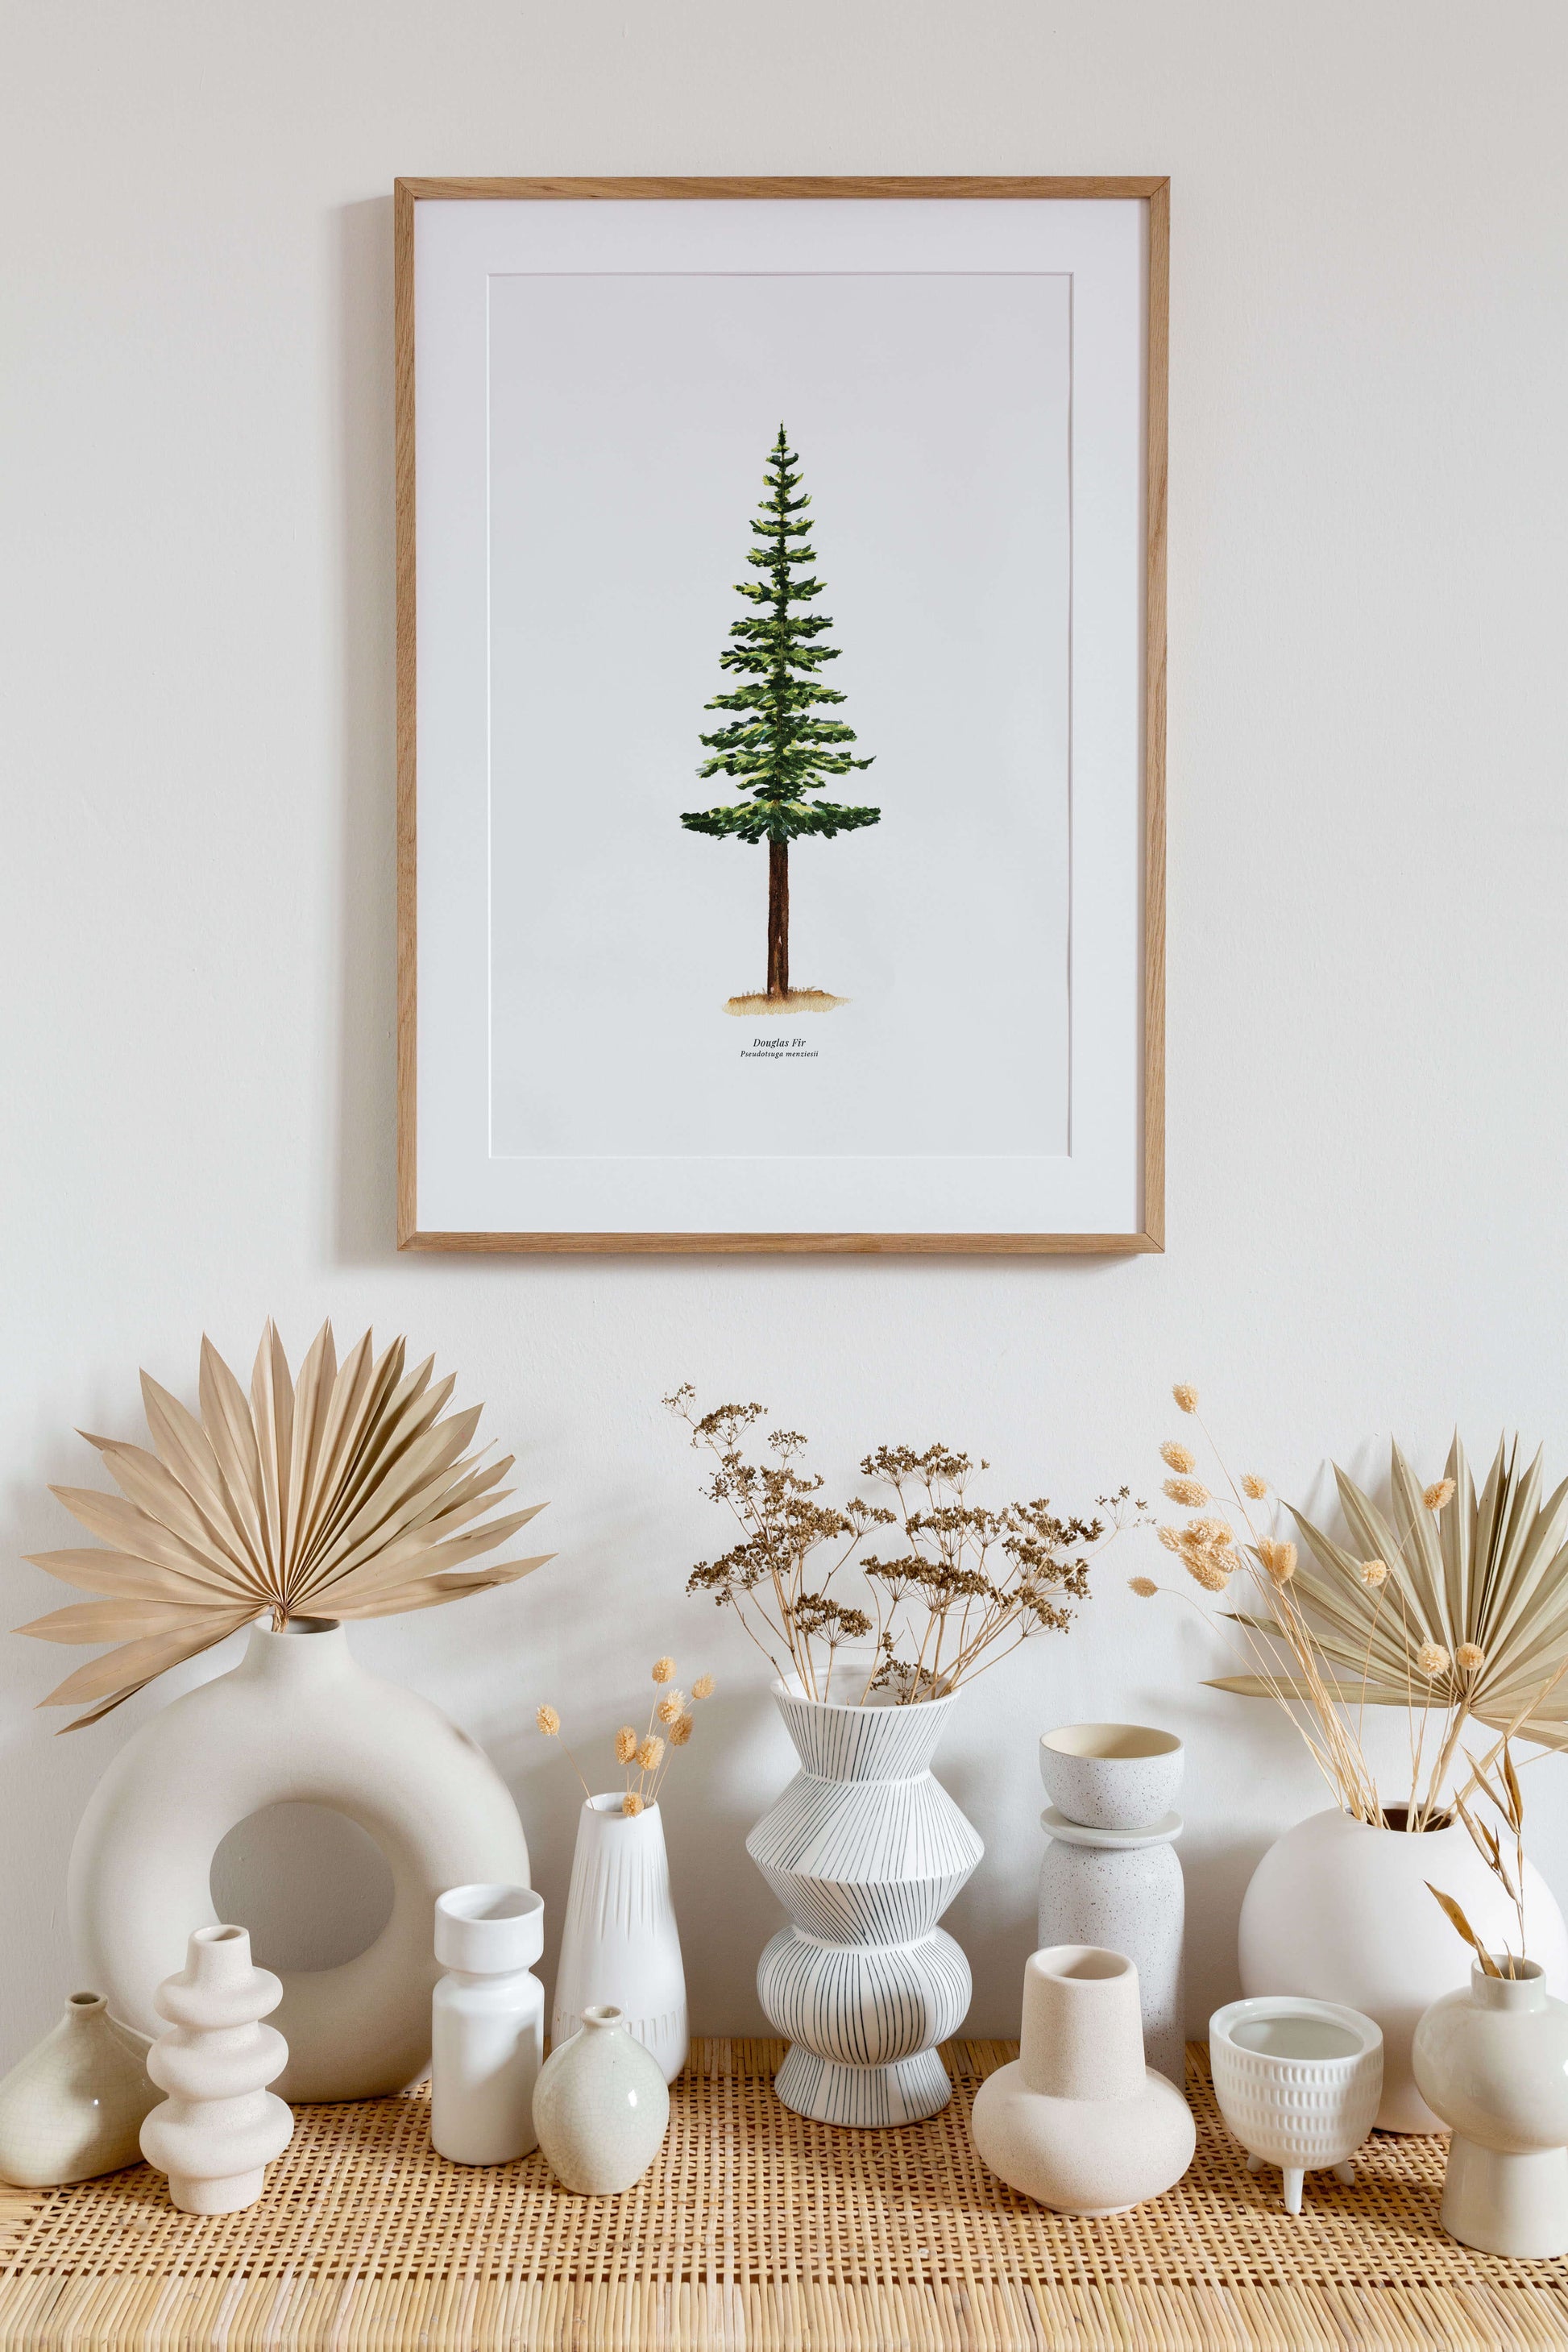 a framed print of a pine tree on a wall in a living space